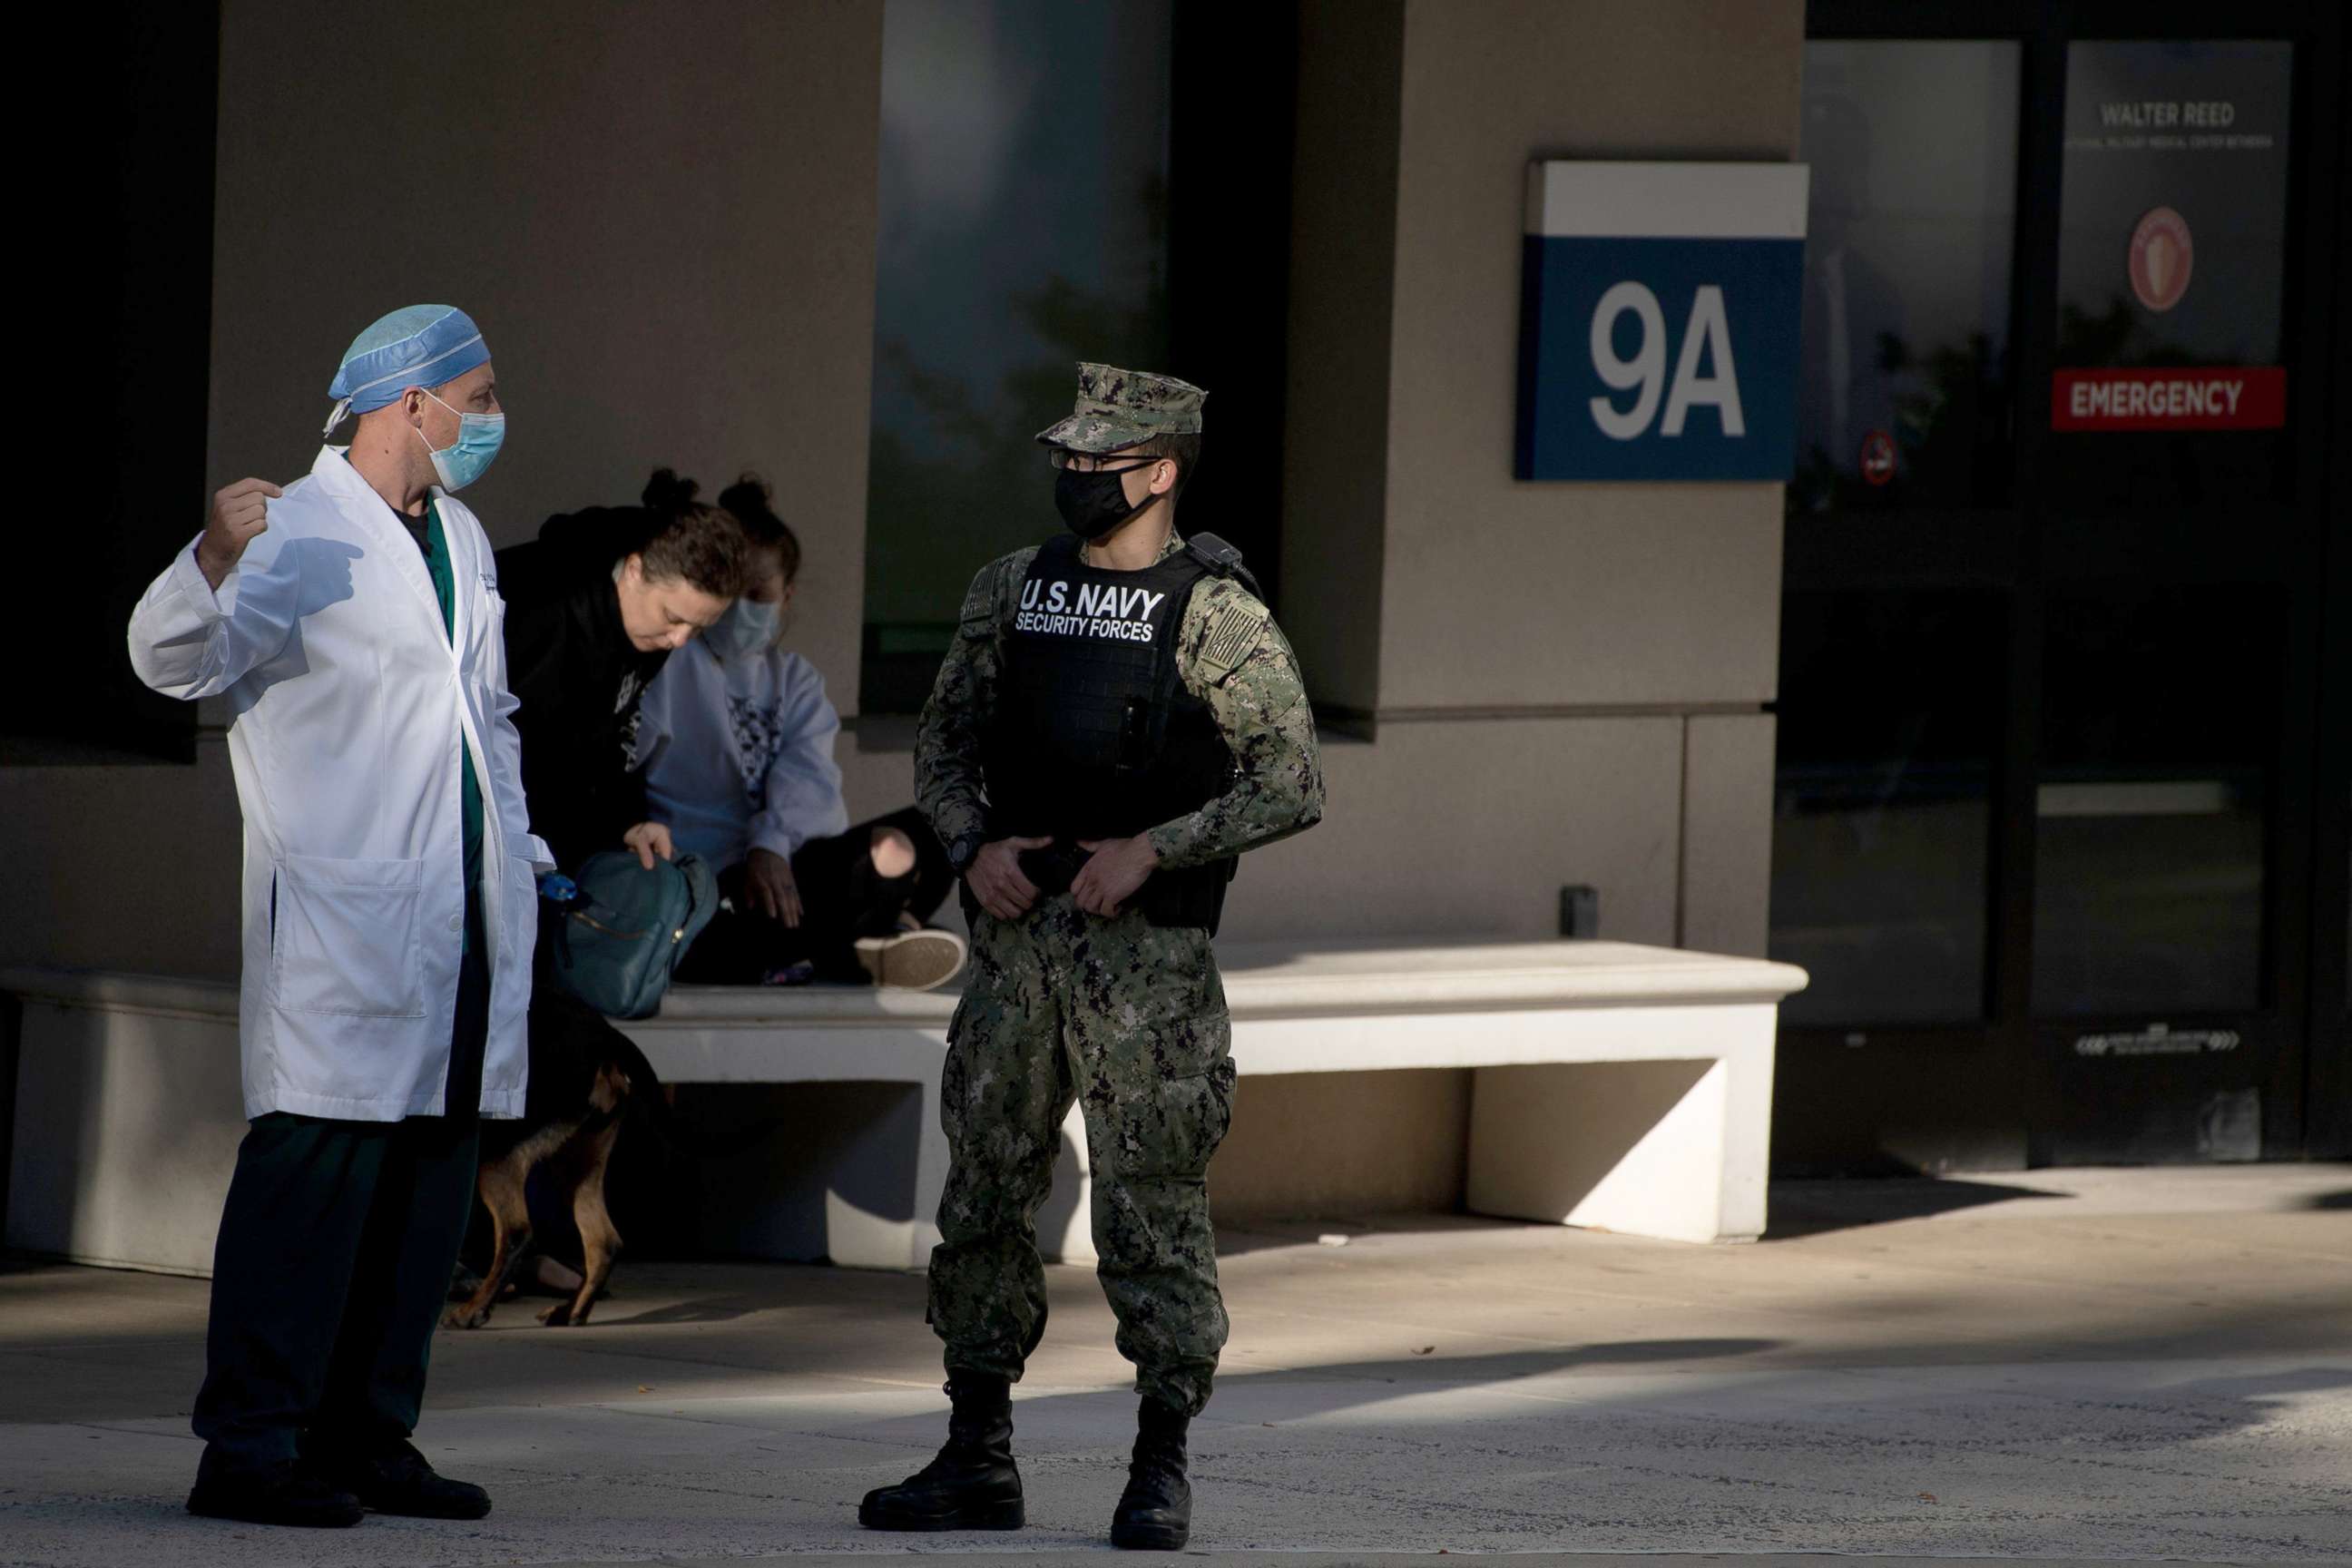 PHOTO: Navy security and medical personnel stand by the emergency entrance of Walter Reed National Military Medical Center, Oct. 2, 2020, in Bethesda, Md., ahead of President Donald Trump's expected arrival.